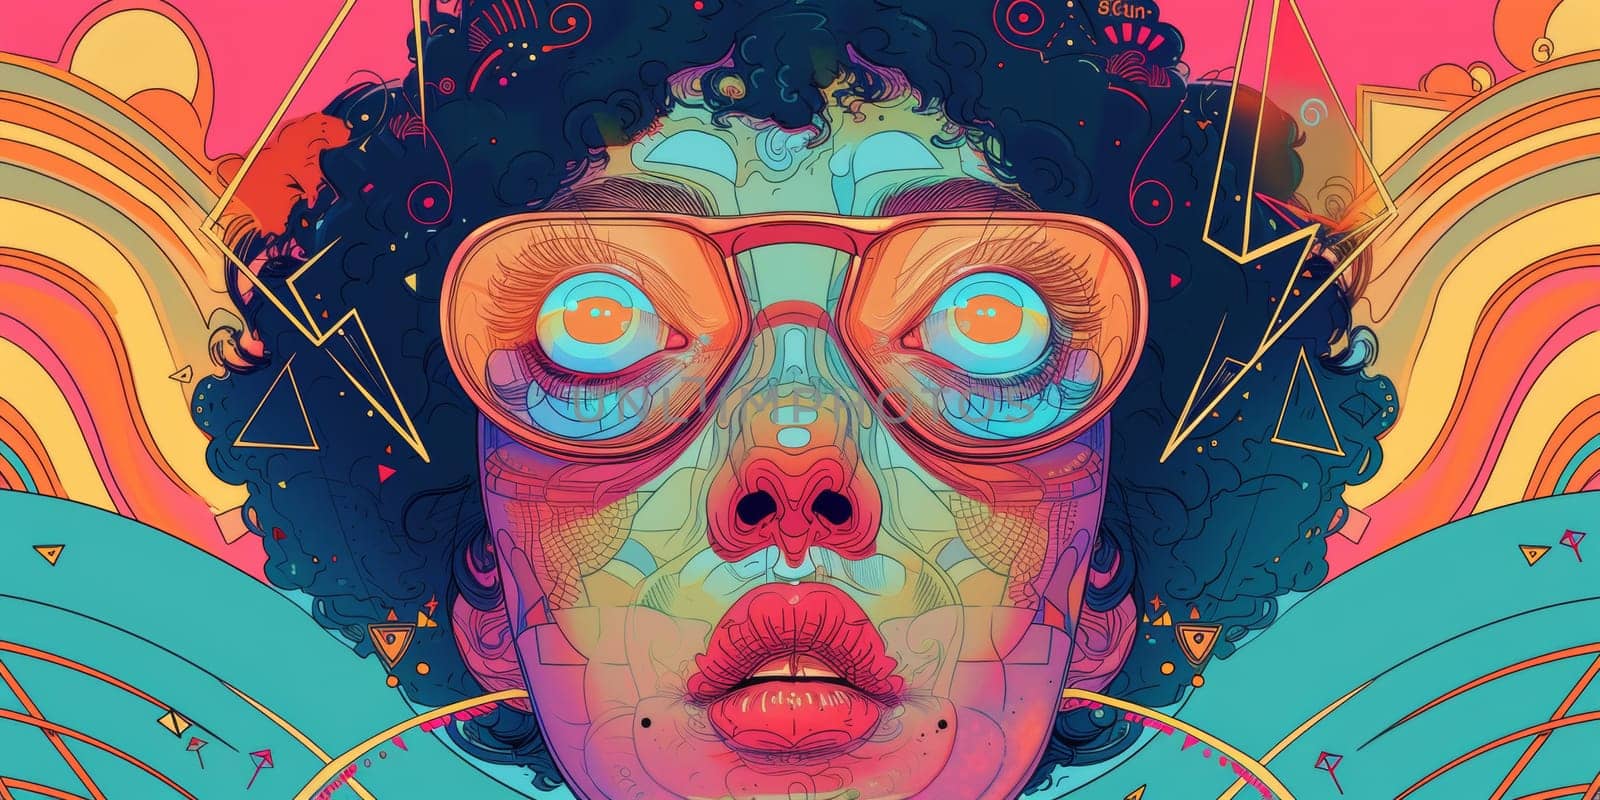 A colorful illustration of a woman with large glasses and curly hair